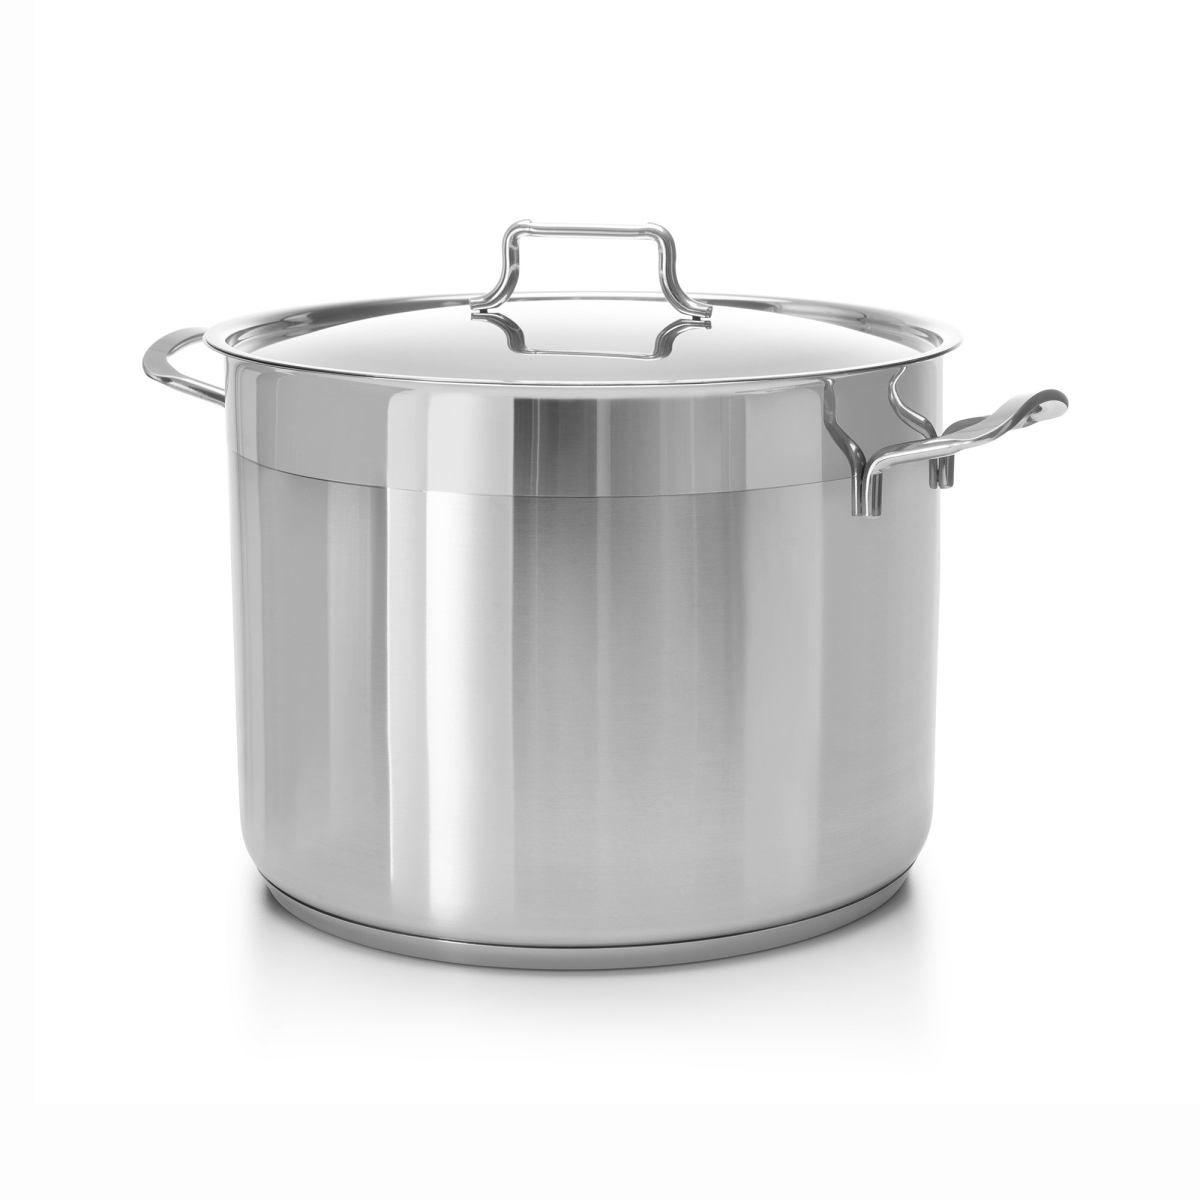 H5 5 Qt. Classic 18 By 10 Stainless Steel Stockpot Covered In Cookware Induction